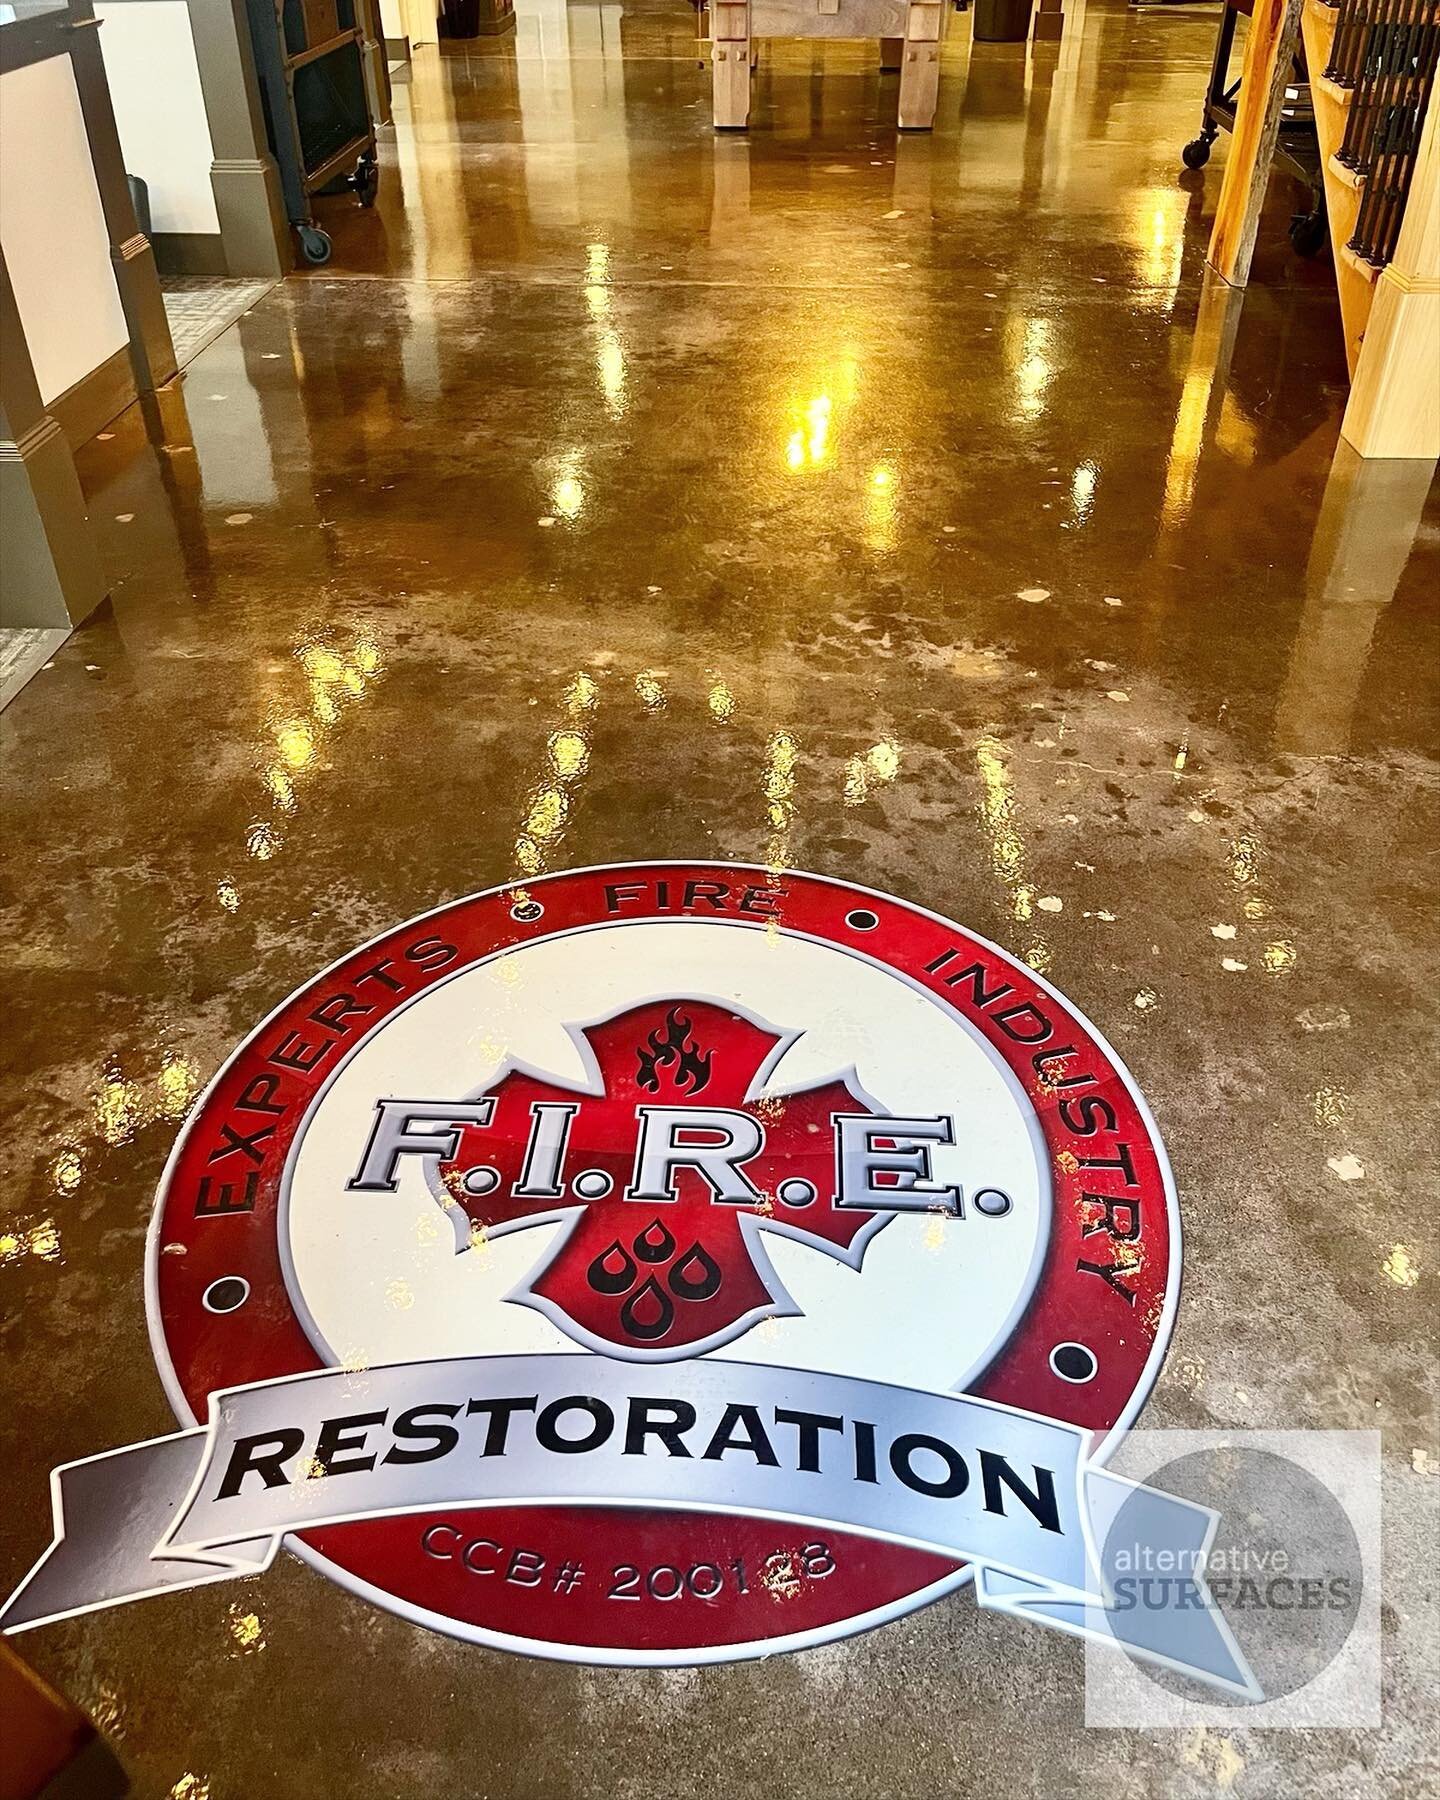 Last week, we had the opportunity to stop by the location of a previous Grind and Seal installation. FIRE Restoration does a yearly trip to Mexico where they do mission work and build houses. We were stopping by to drop off some donations for their e